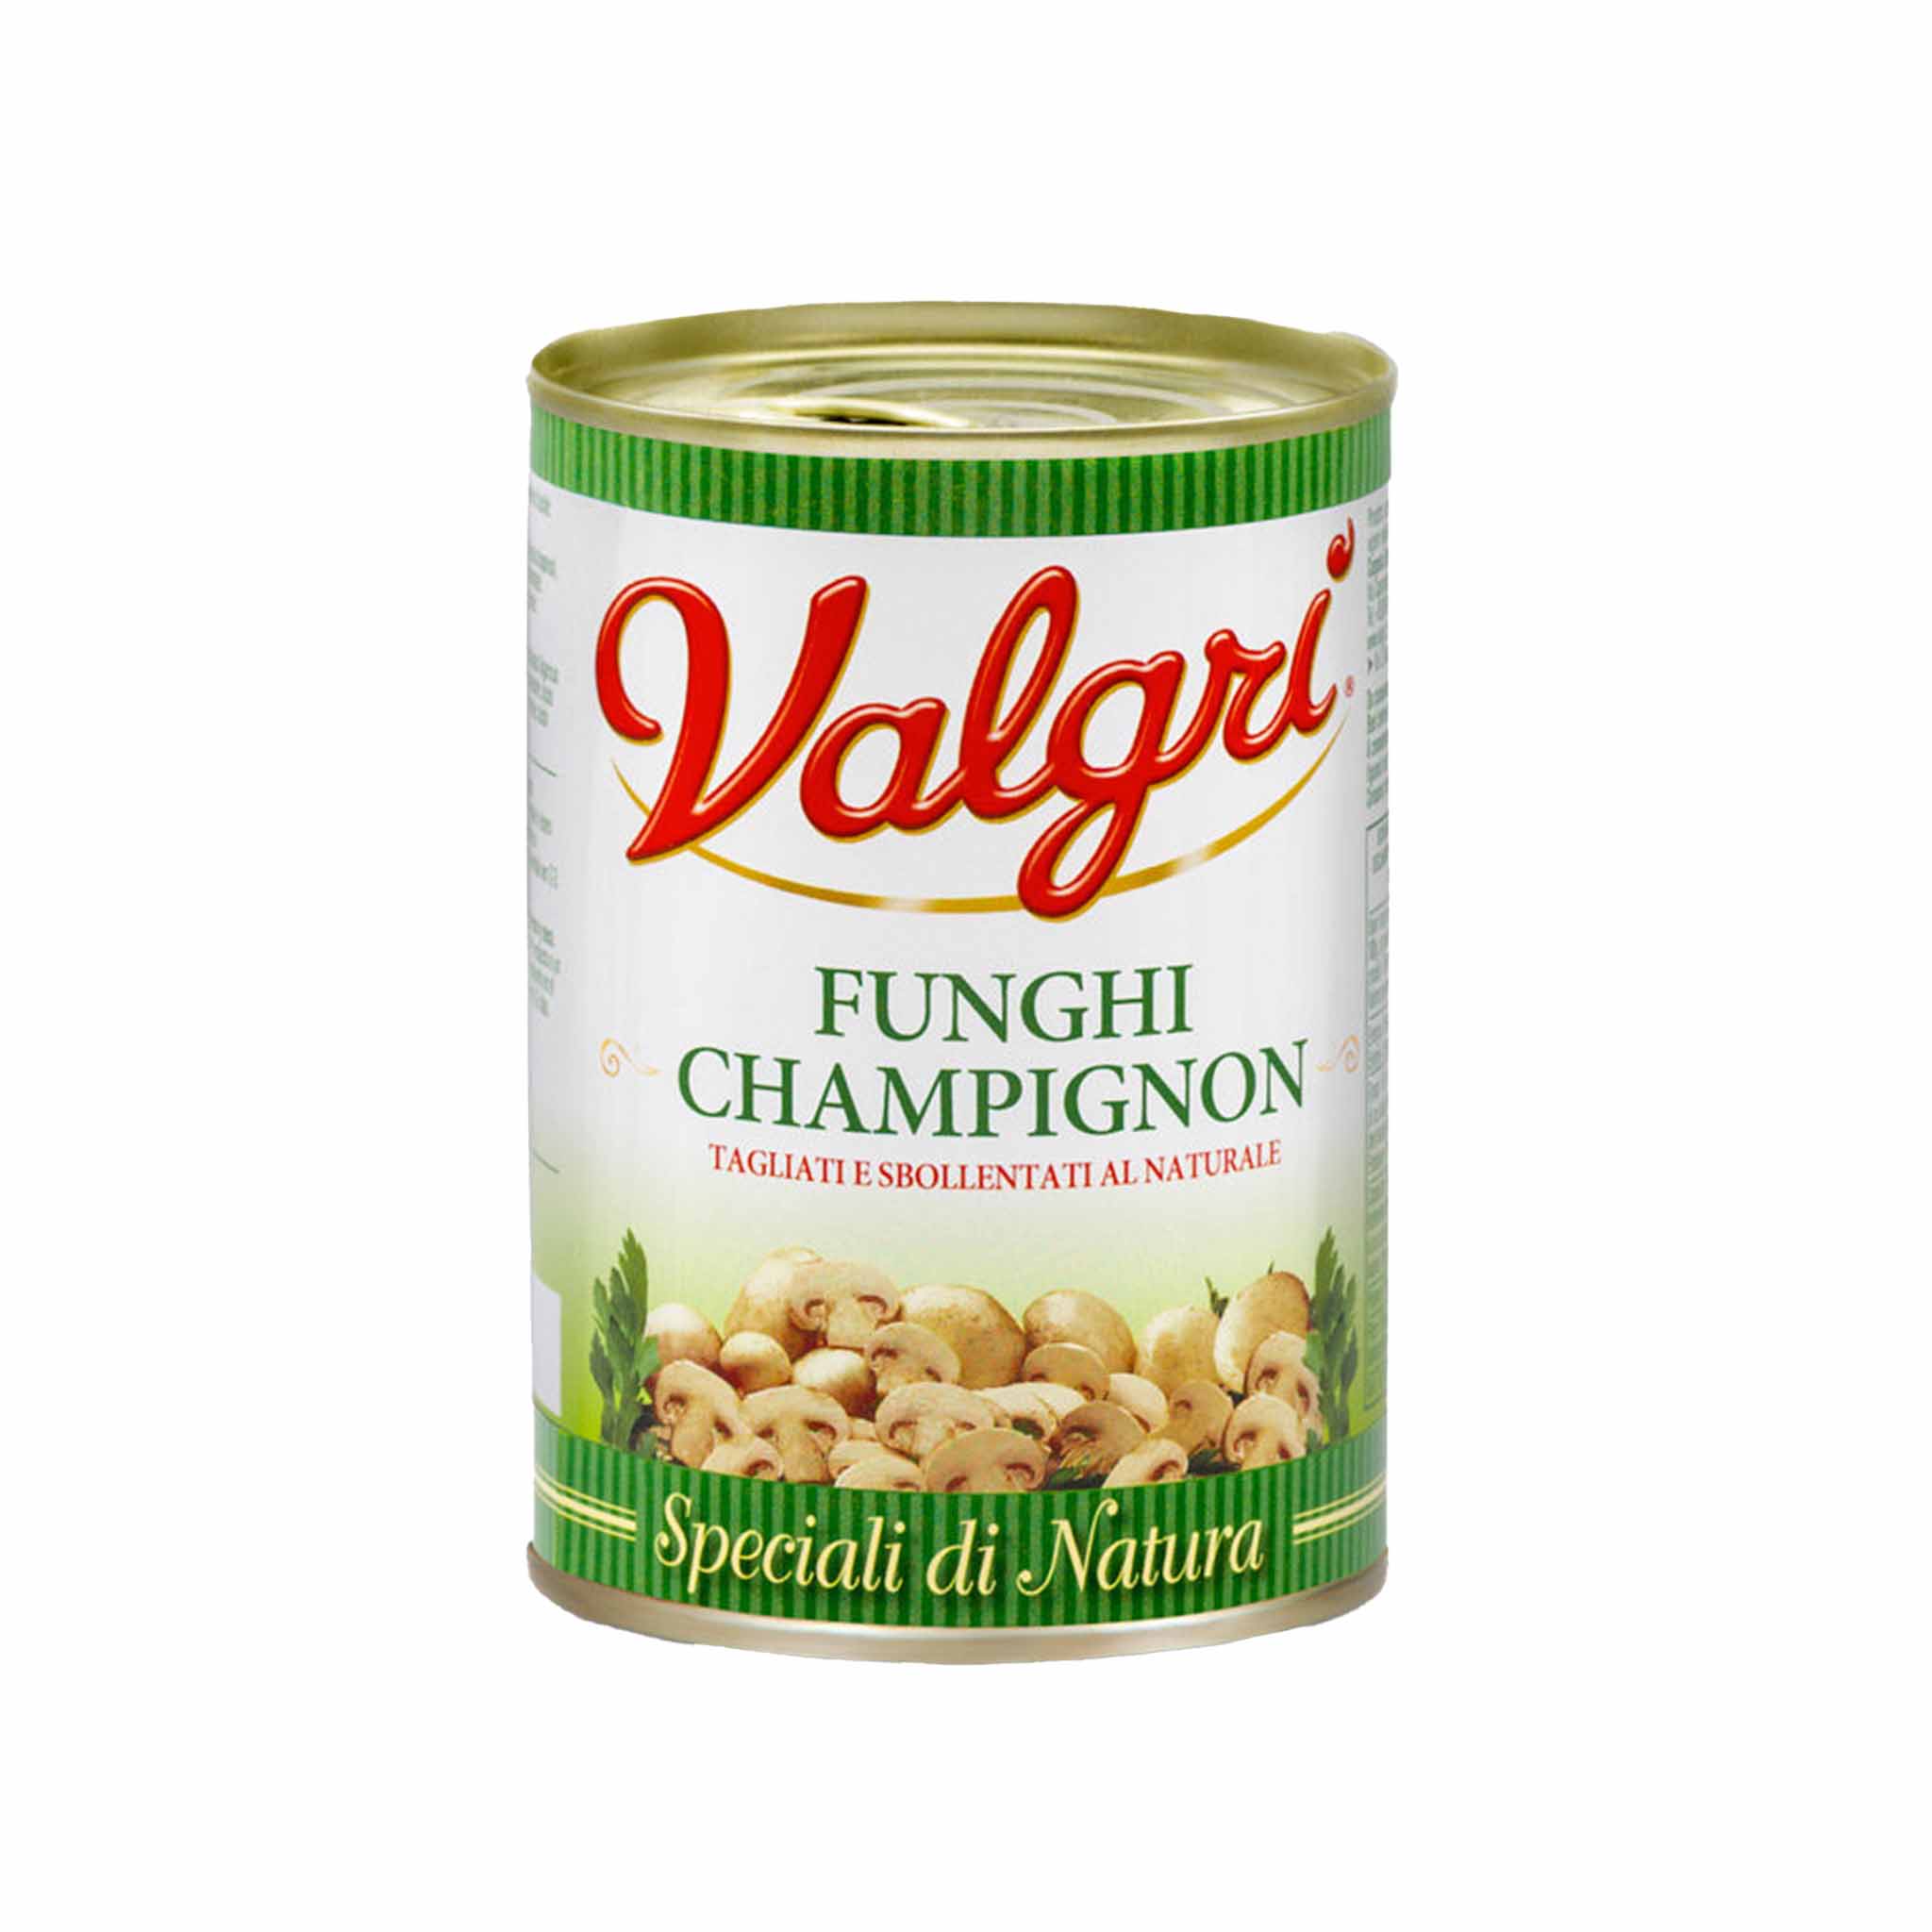 Funghi Mushrooms Champignons in a Can